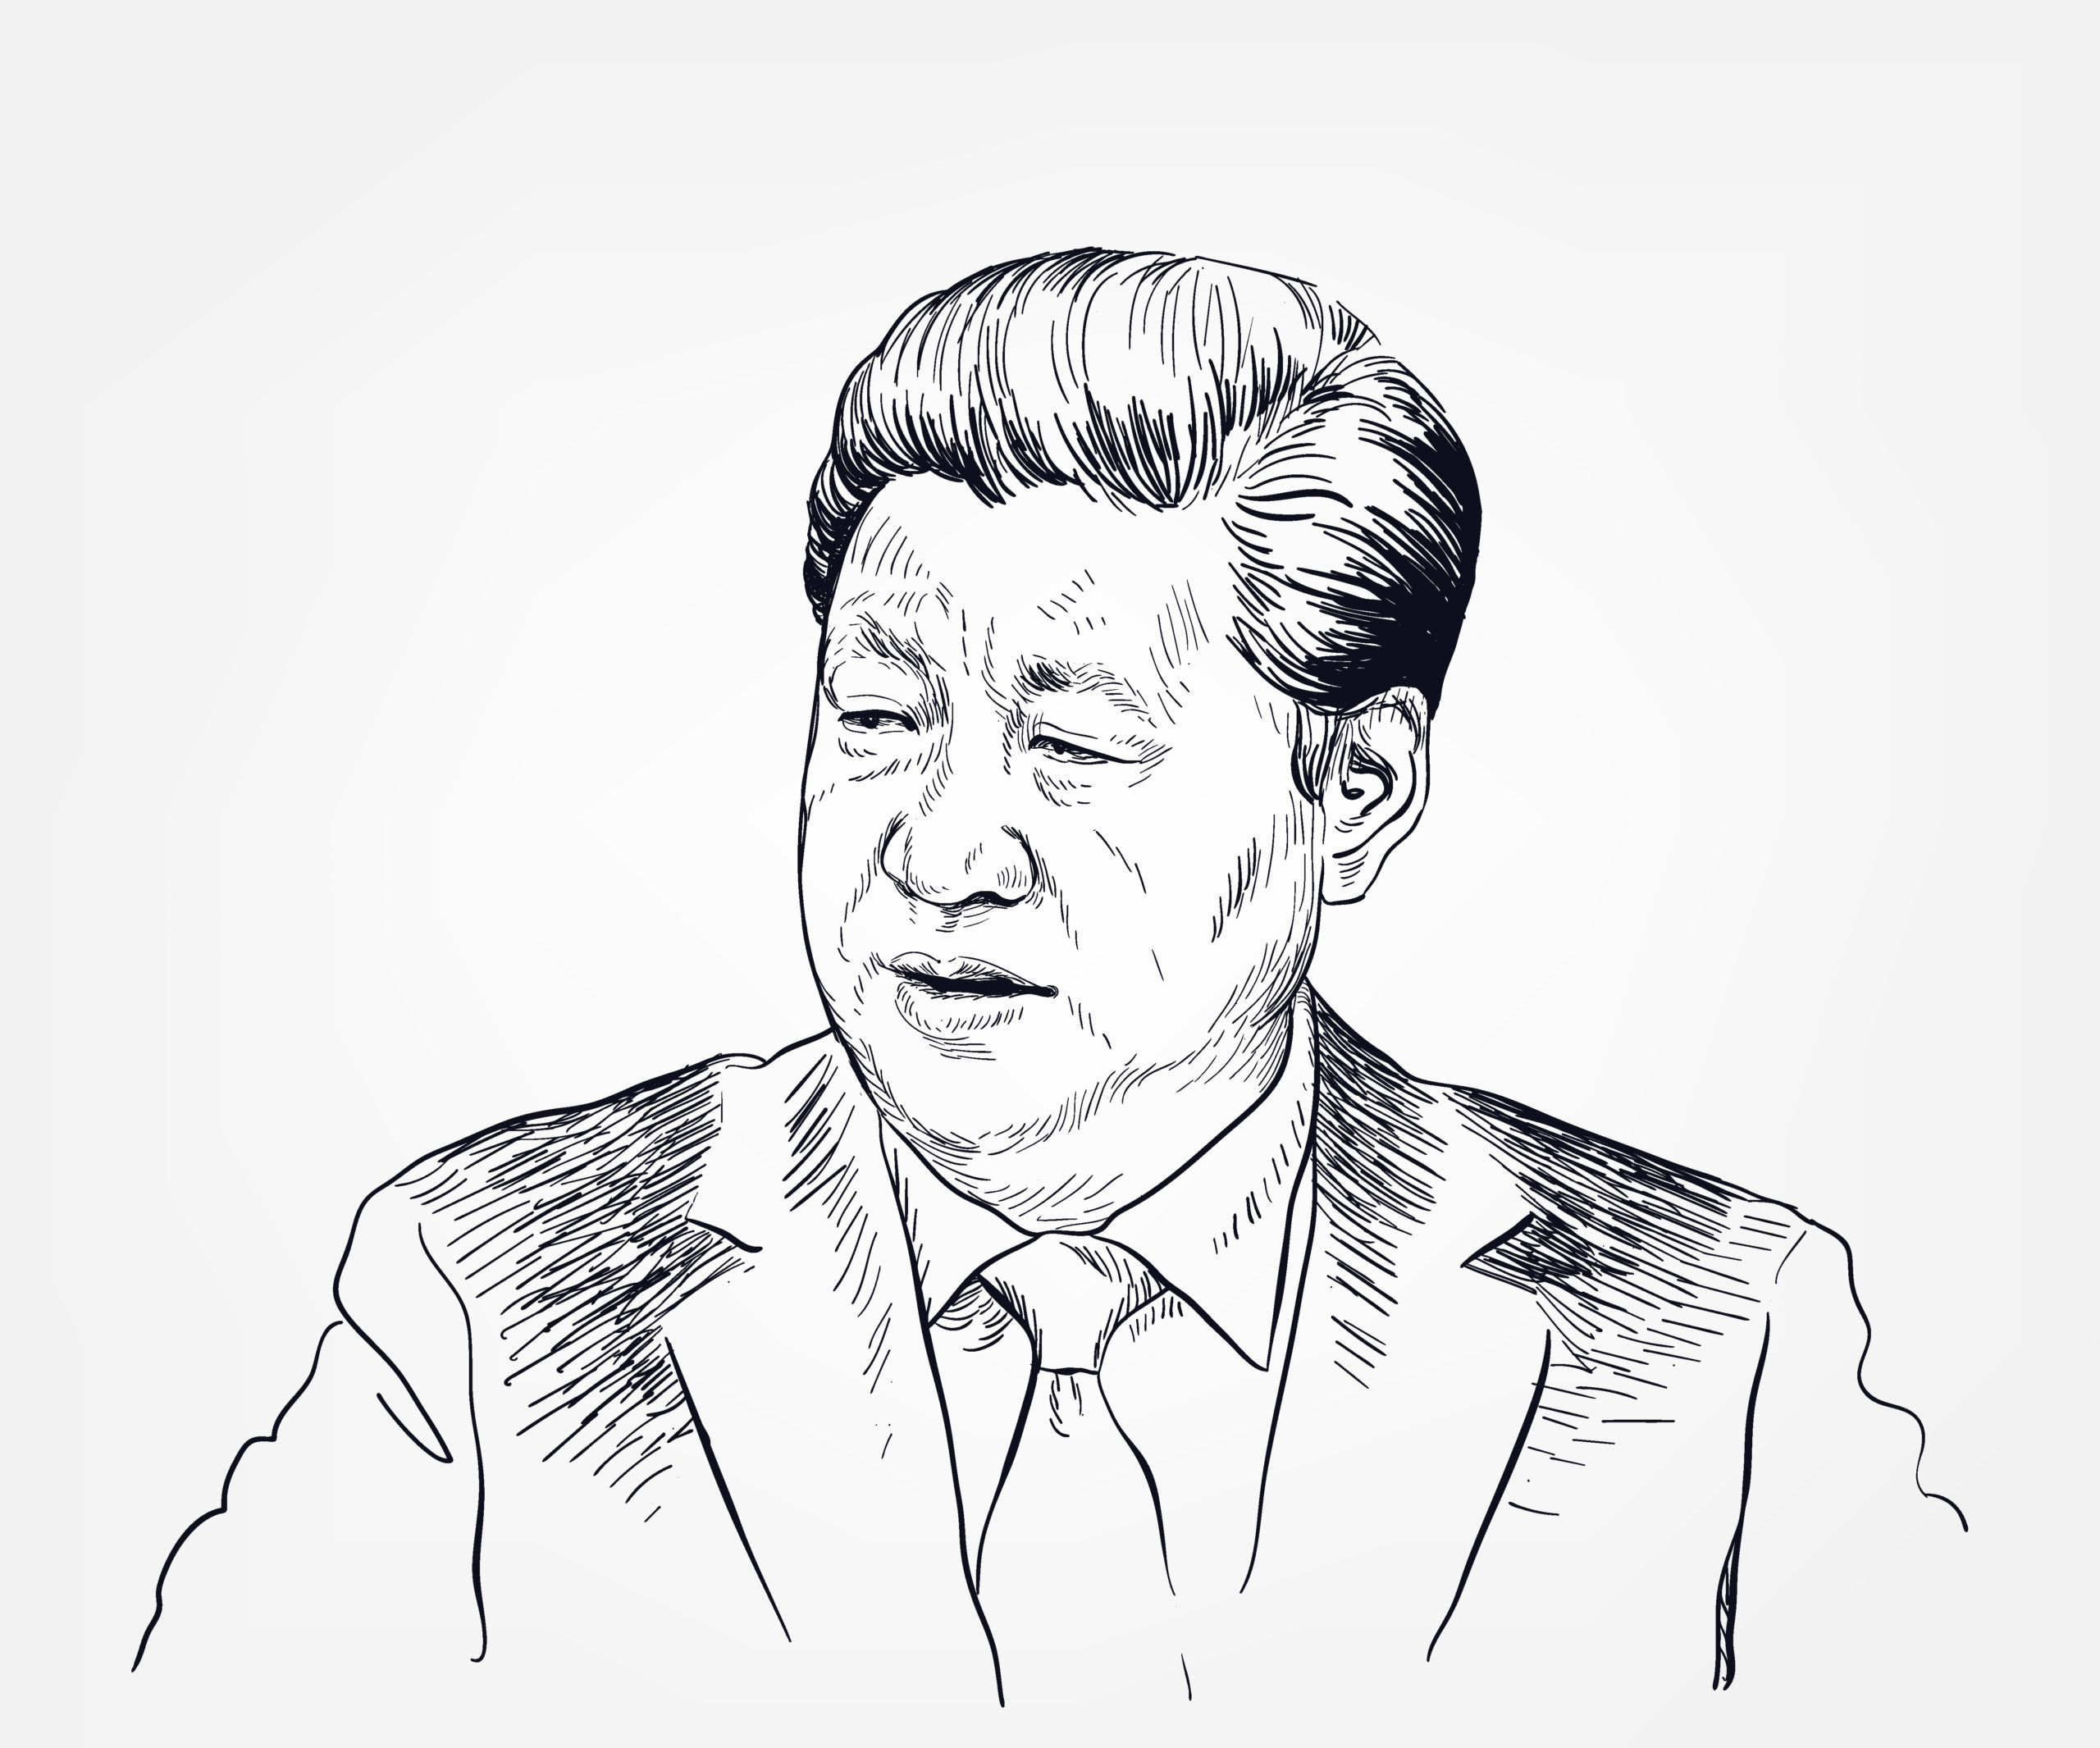 Will Xi Jinping Continue to Rule China?